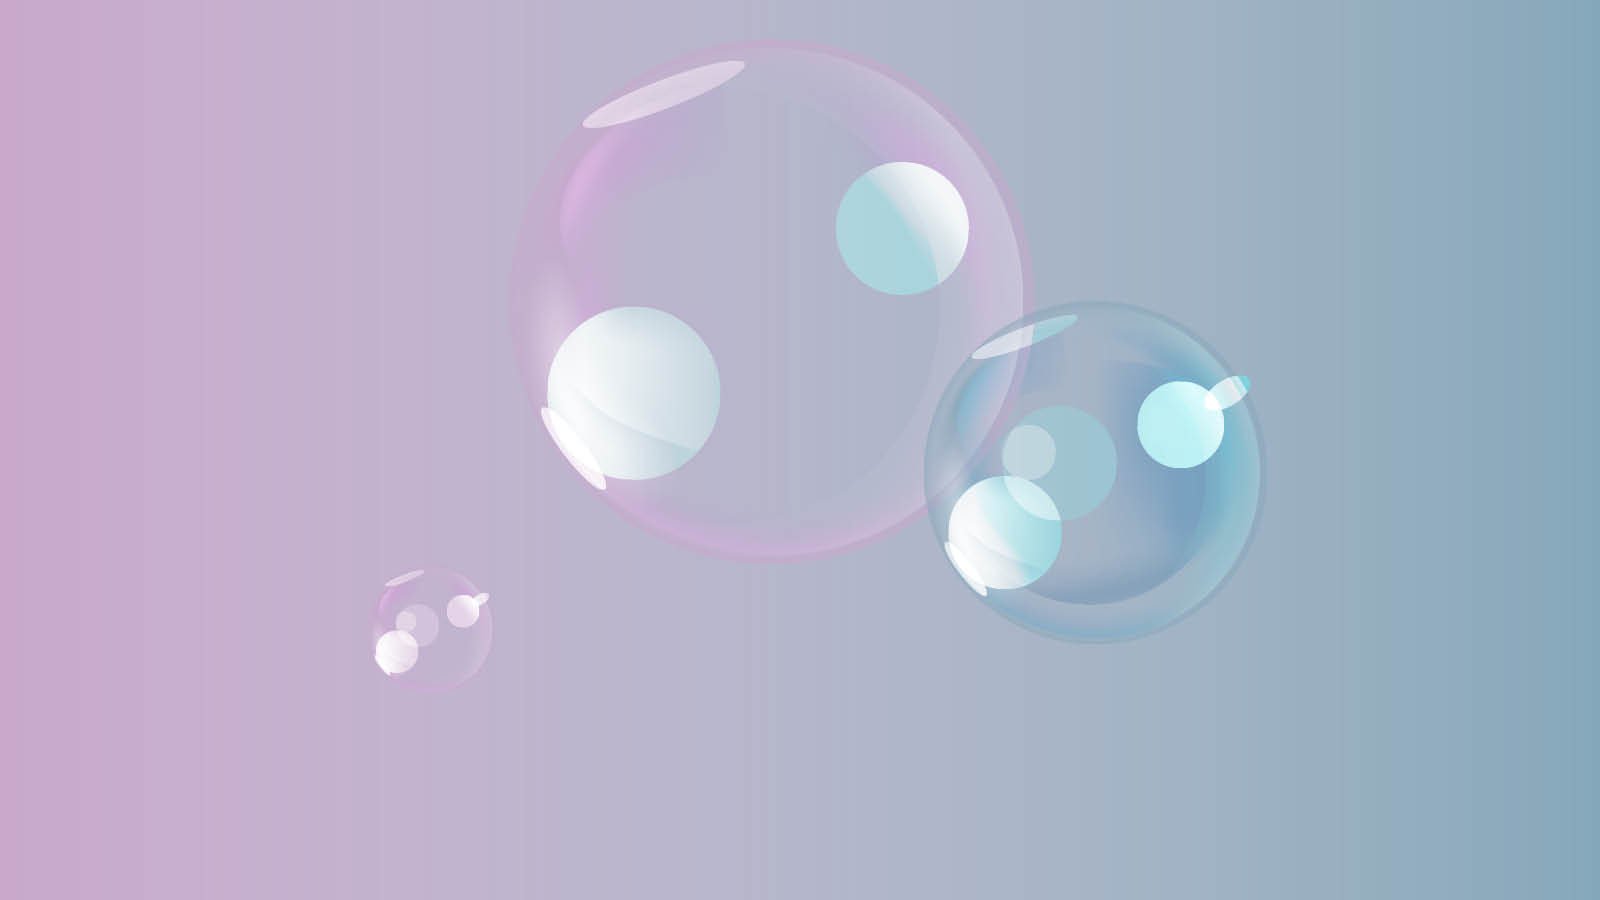 illustrated bubbles floating on gradient purple to blue background